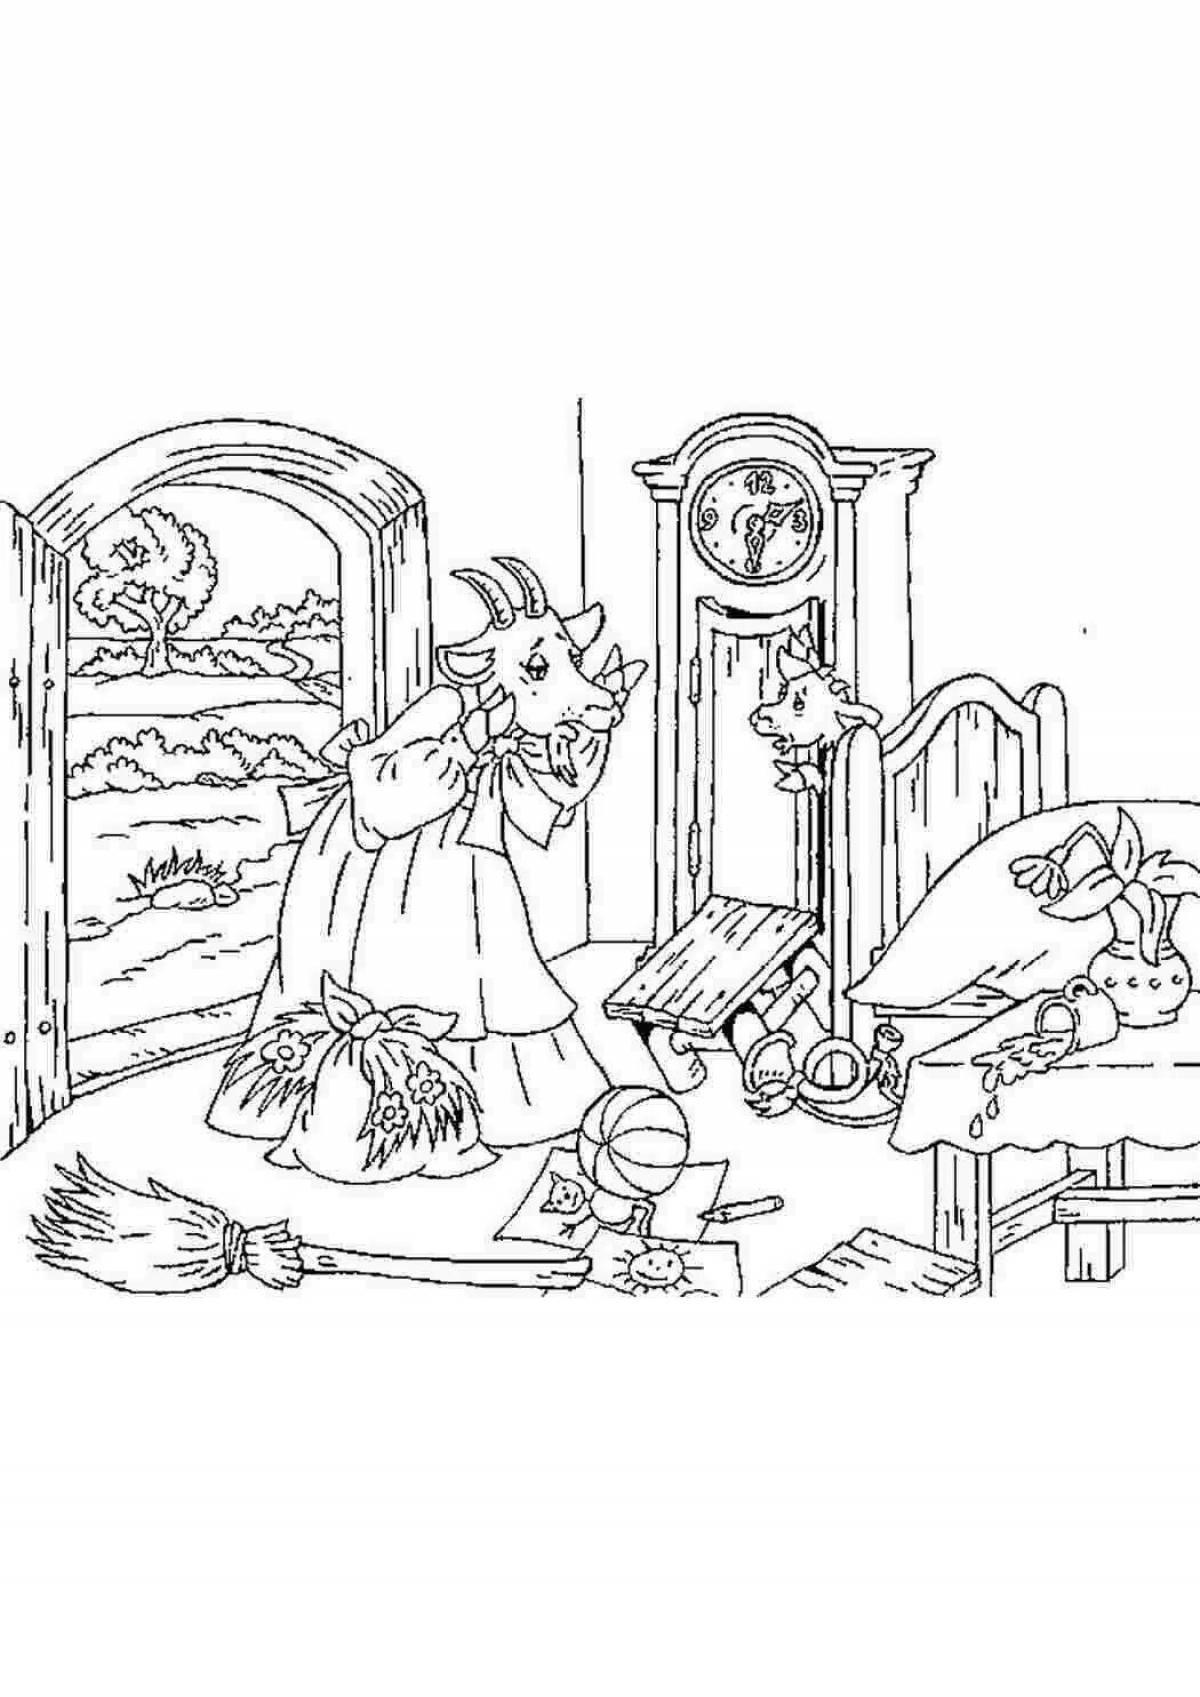 Colorful goat and seven kids coloring page